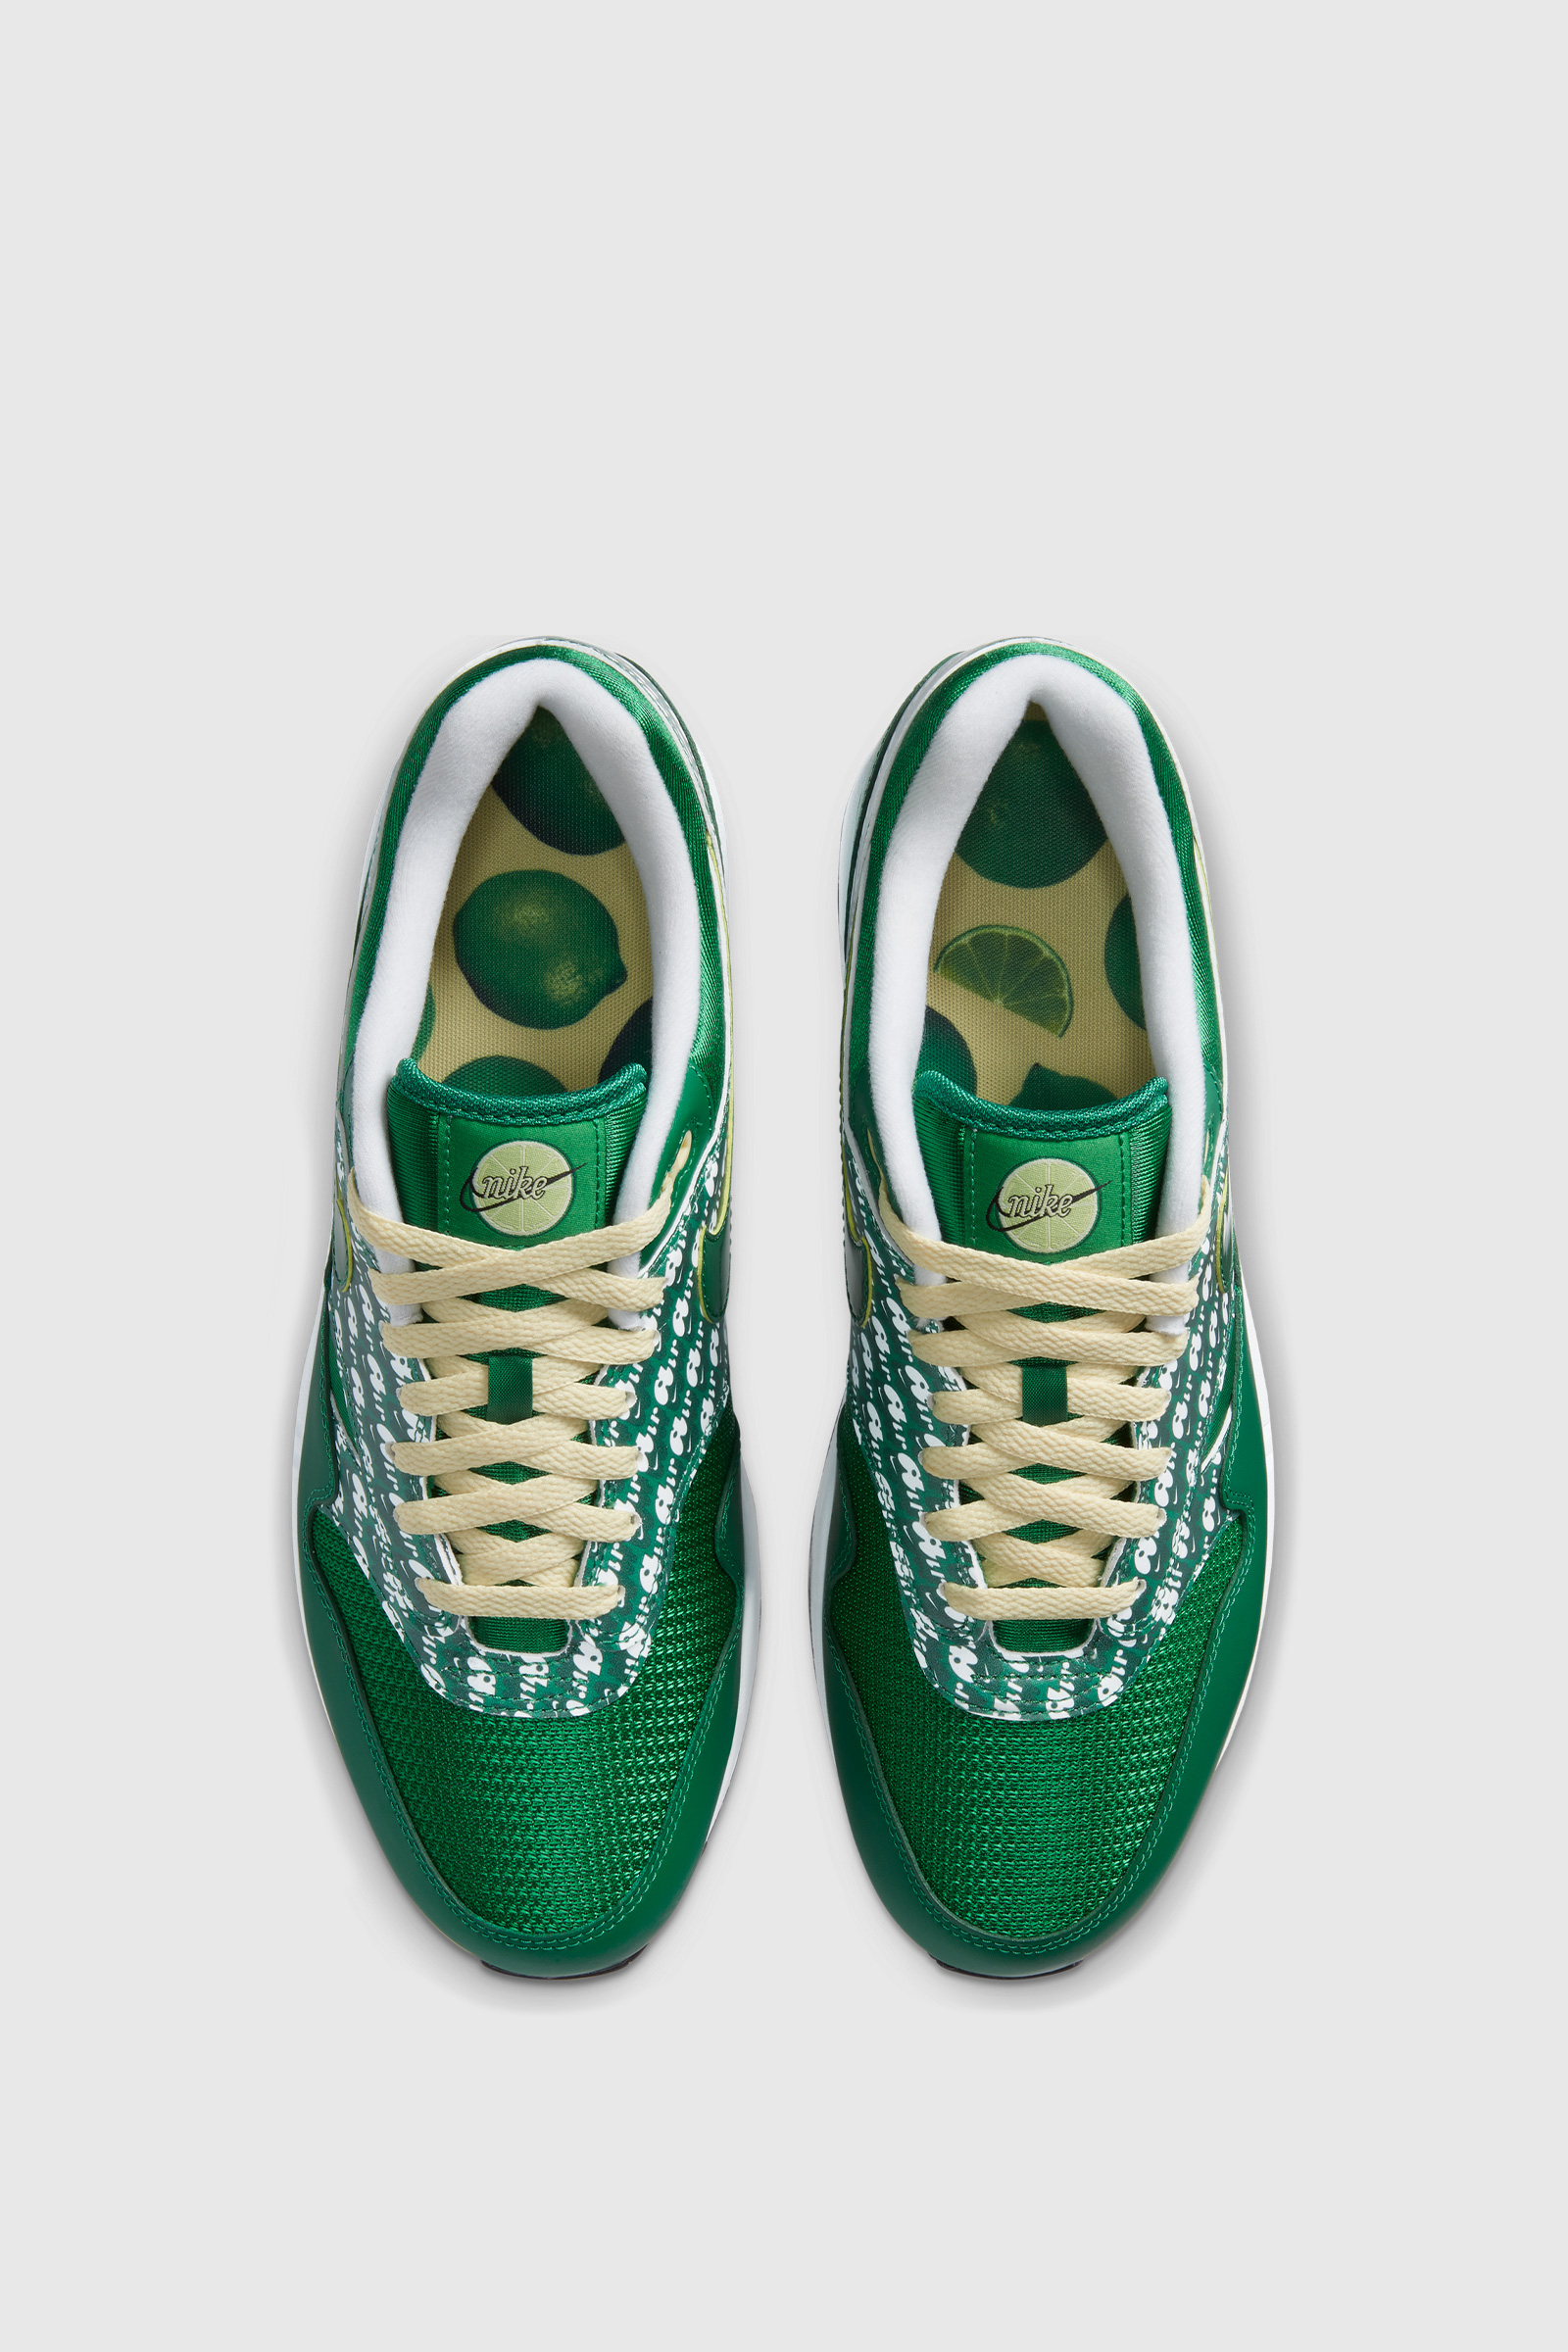 nike air max 1 green and white